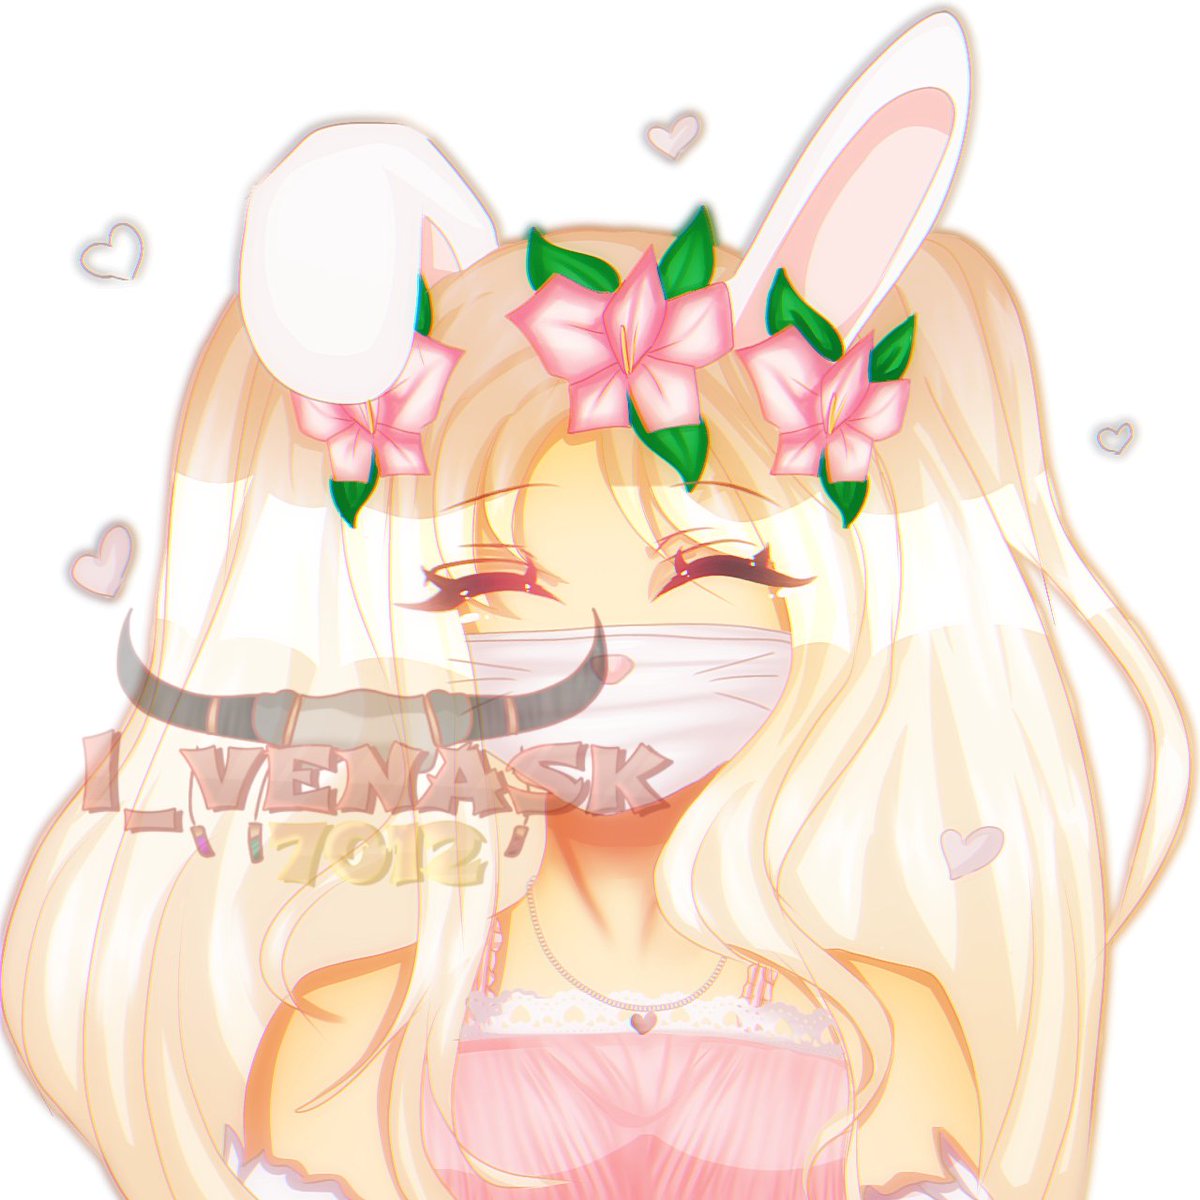 I_venask on X: Some more soft comms! :D #art #Roblox #RobloxArtCommissions  #digitalart #robloxartist #rtc #robloxart  / X